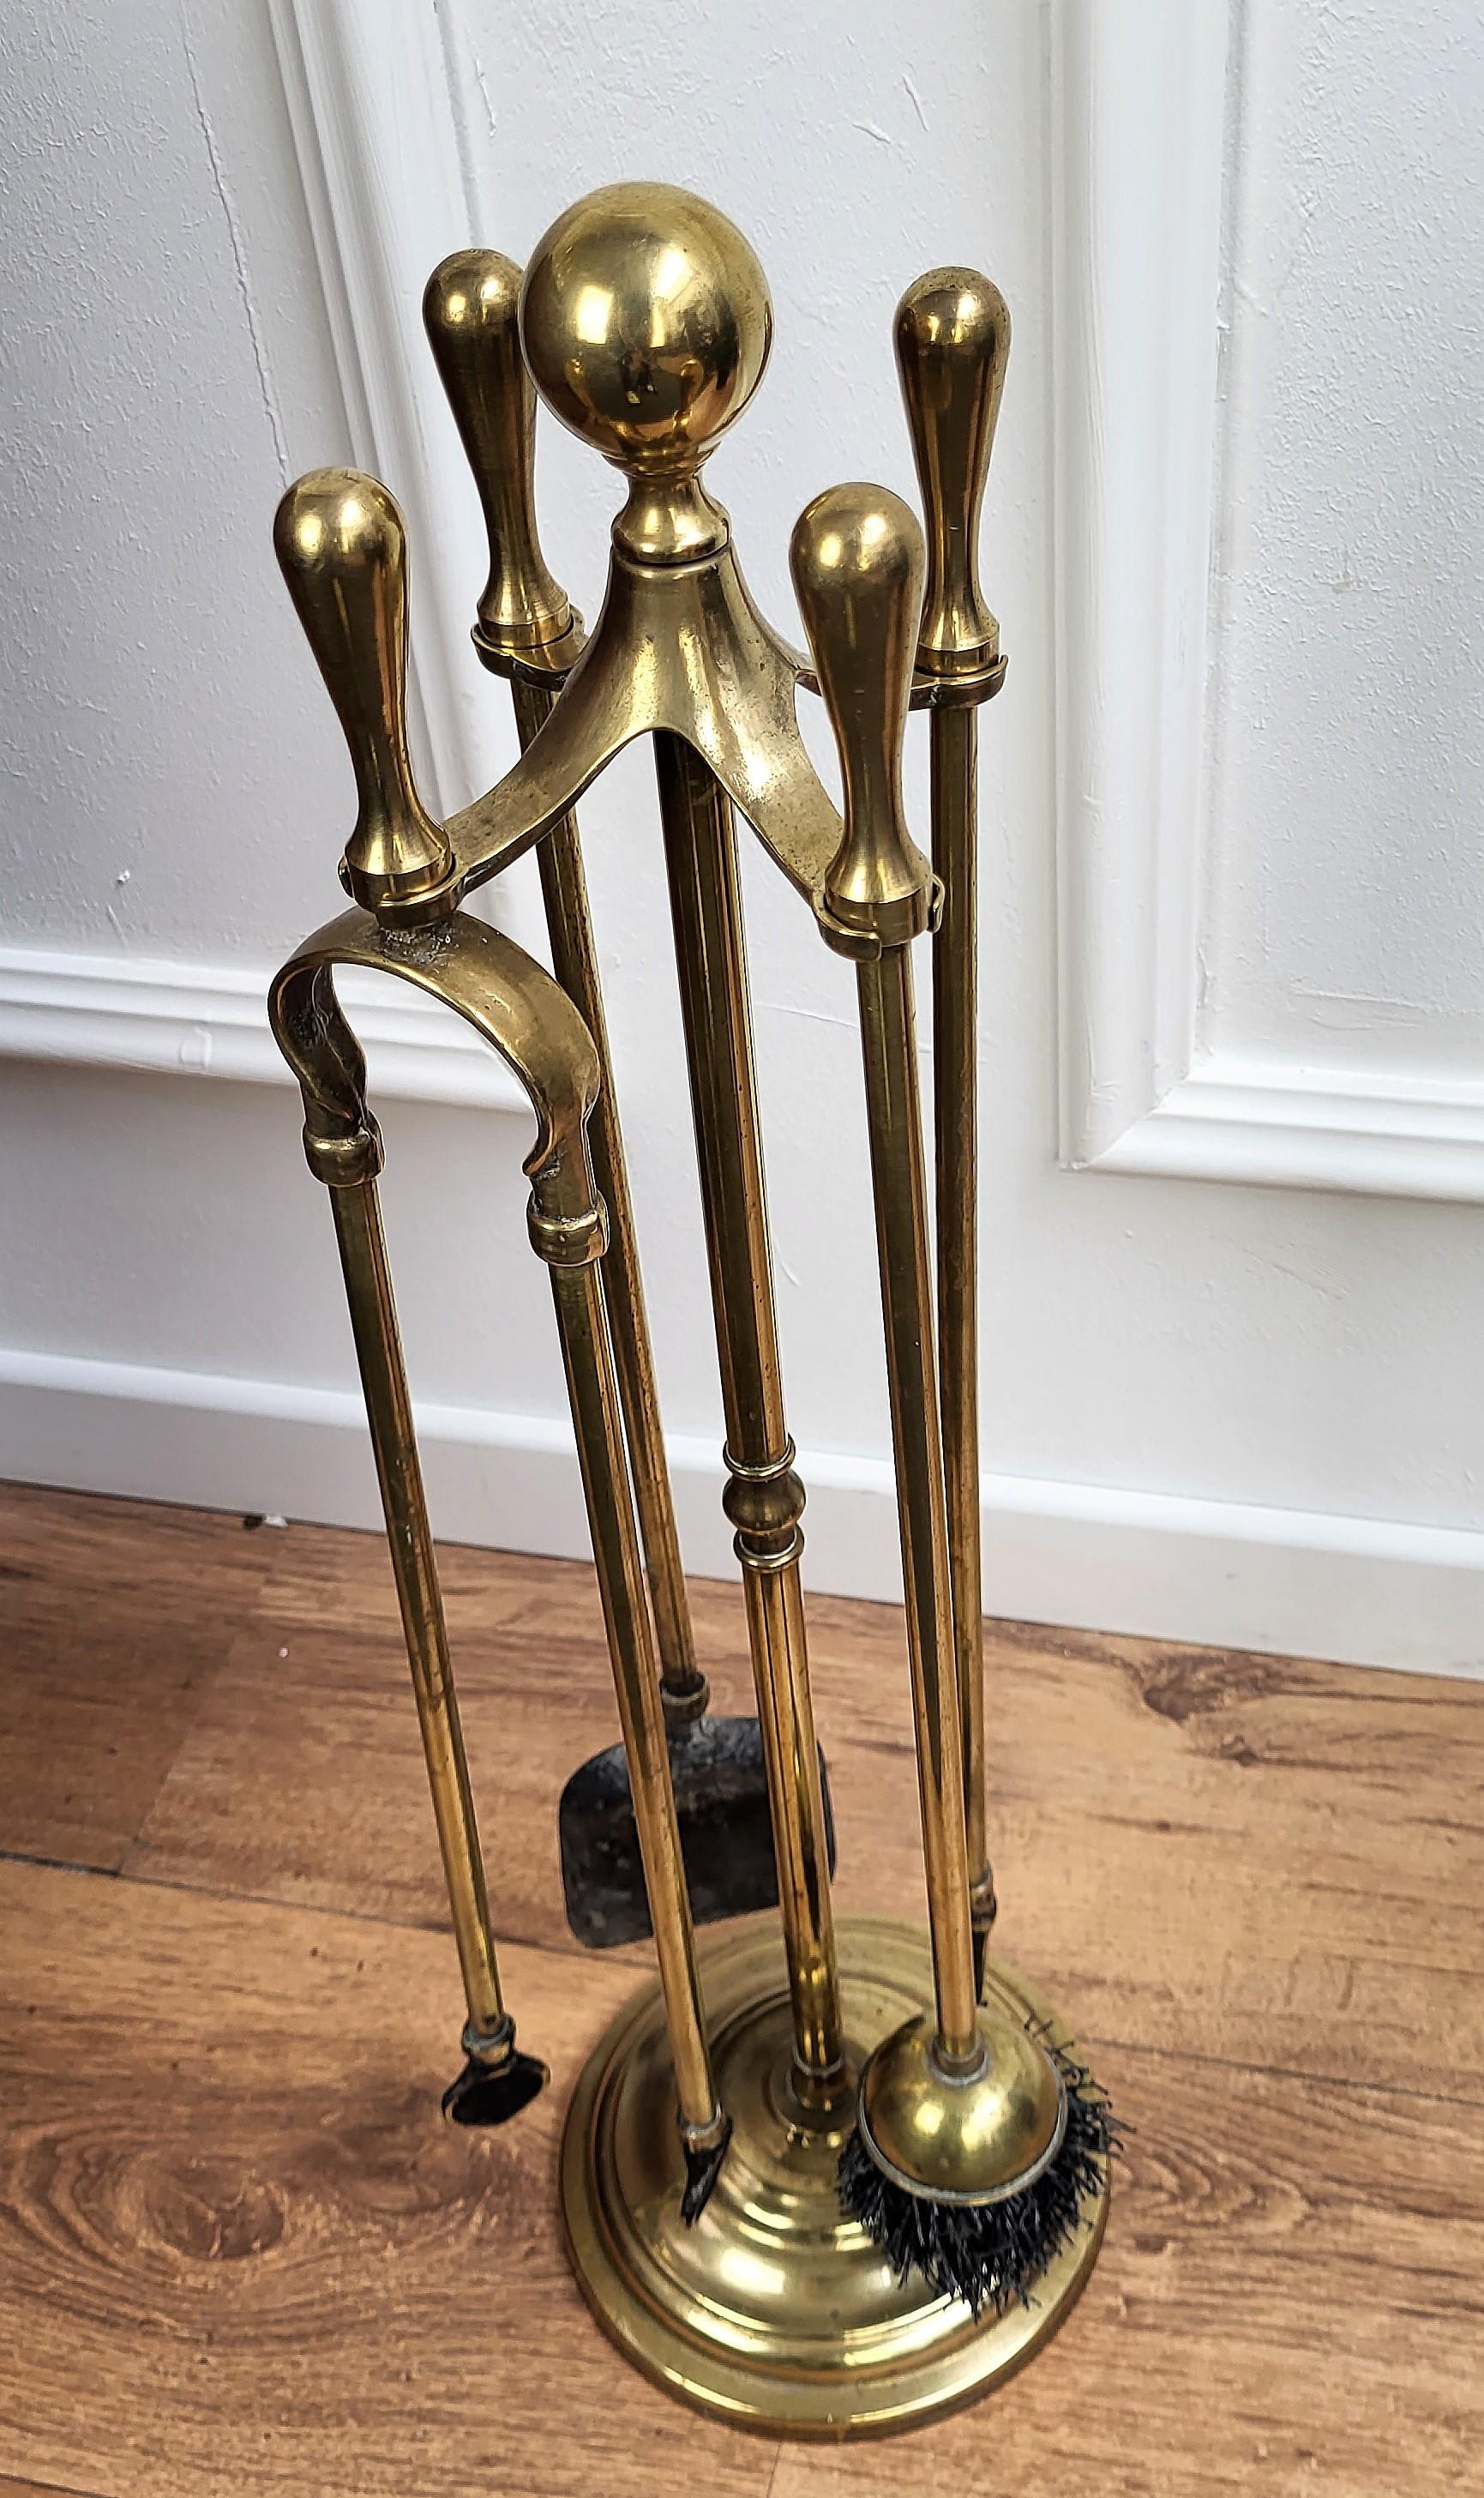 20th Century Italian Four-Piece Brass Vintage Fireplace Fire Tool Set with Stand